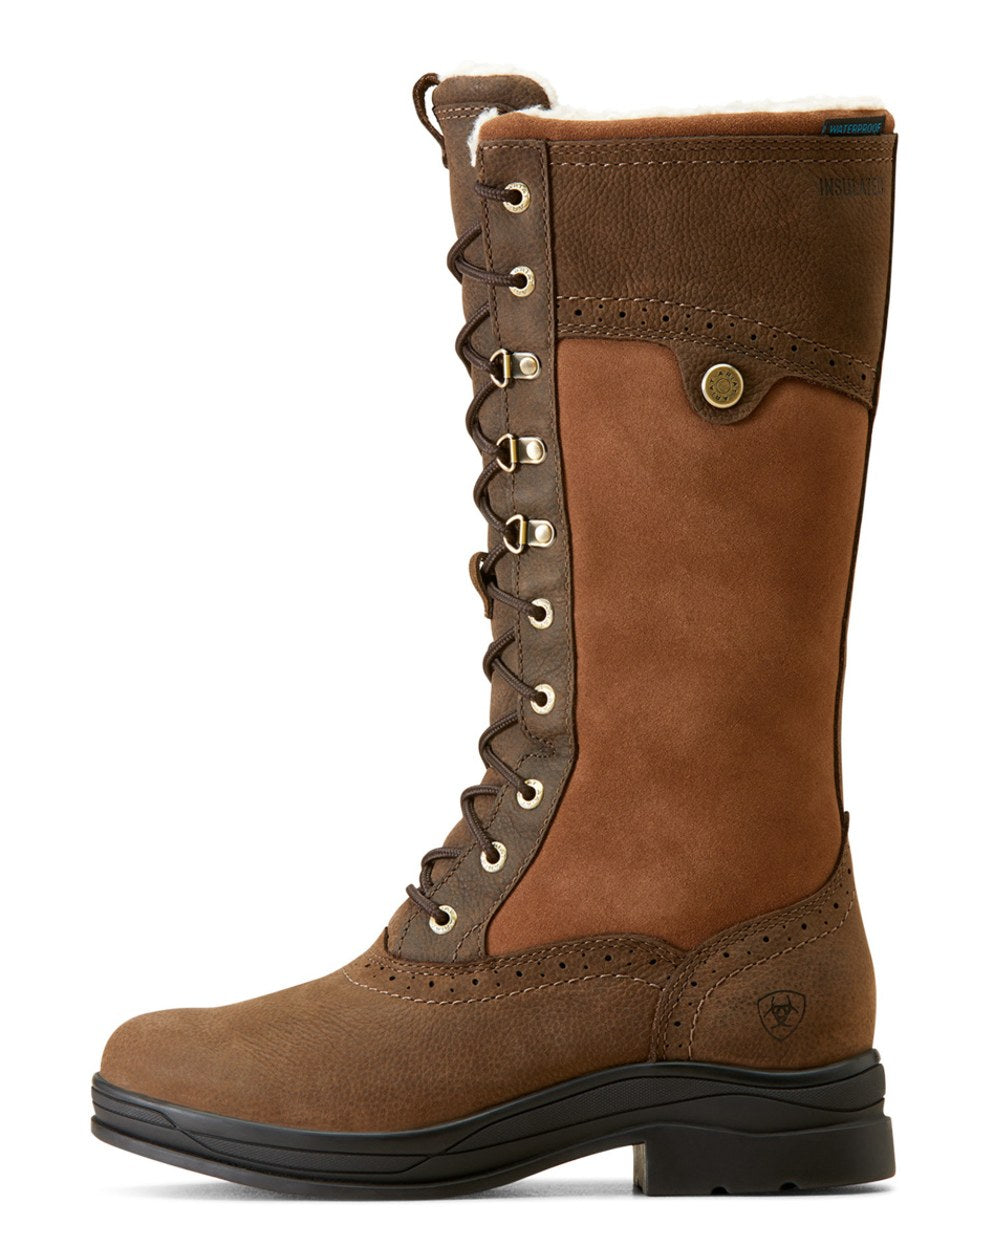 Ariat Womens Wythburn II Waterproof Insulated Boots in Java